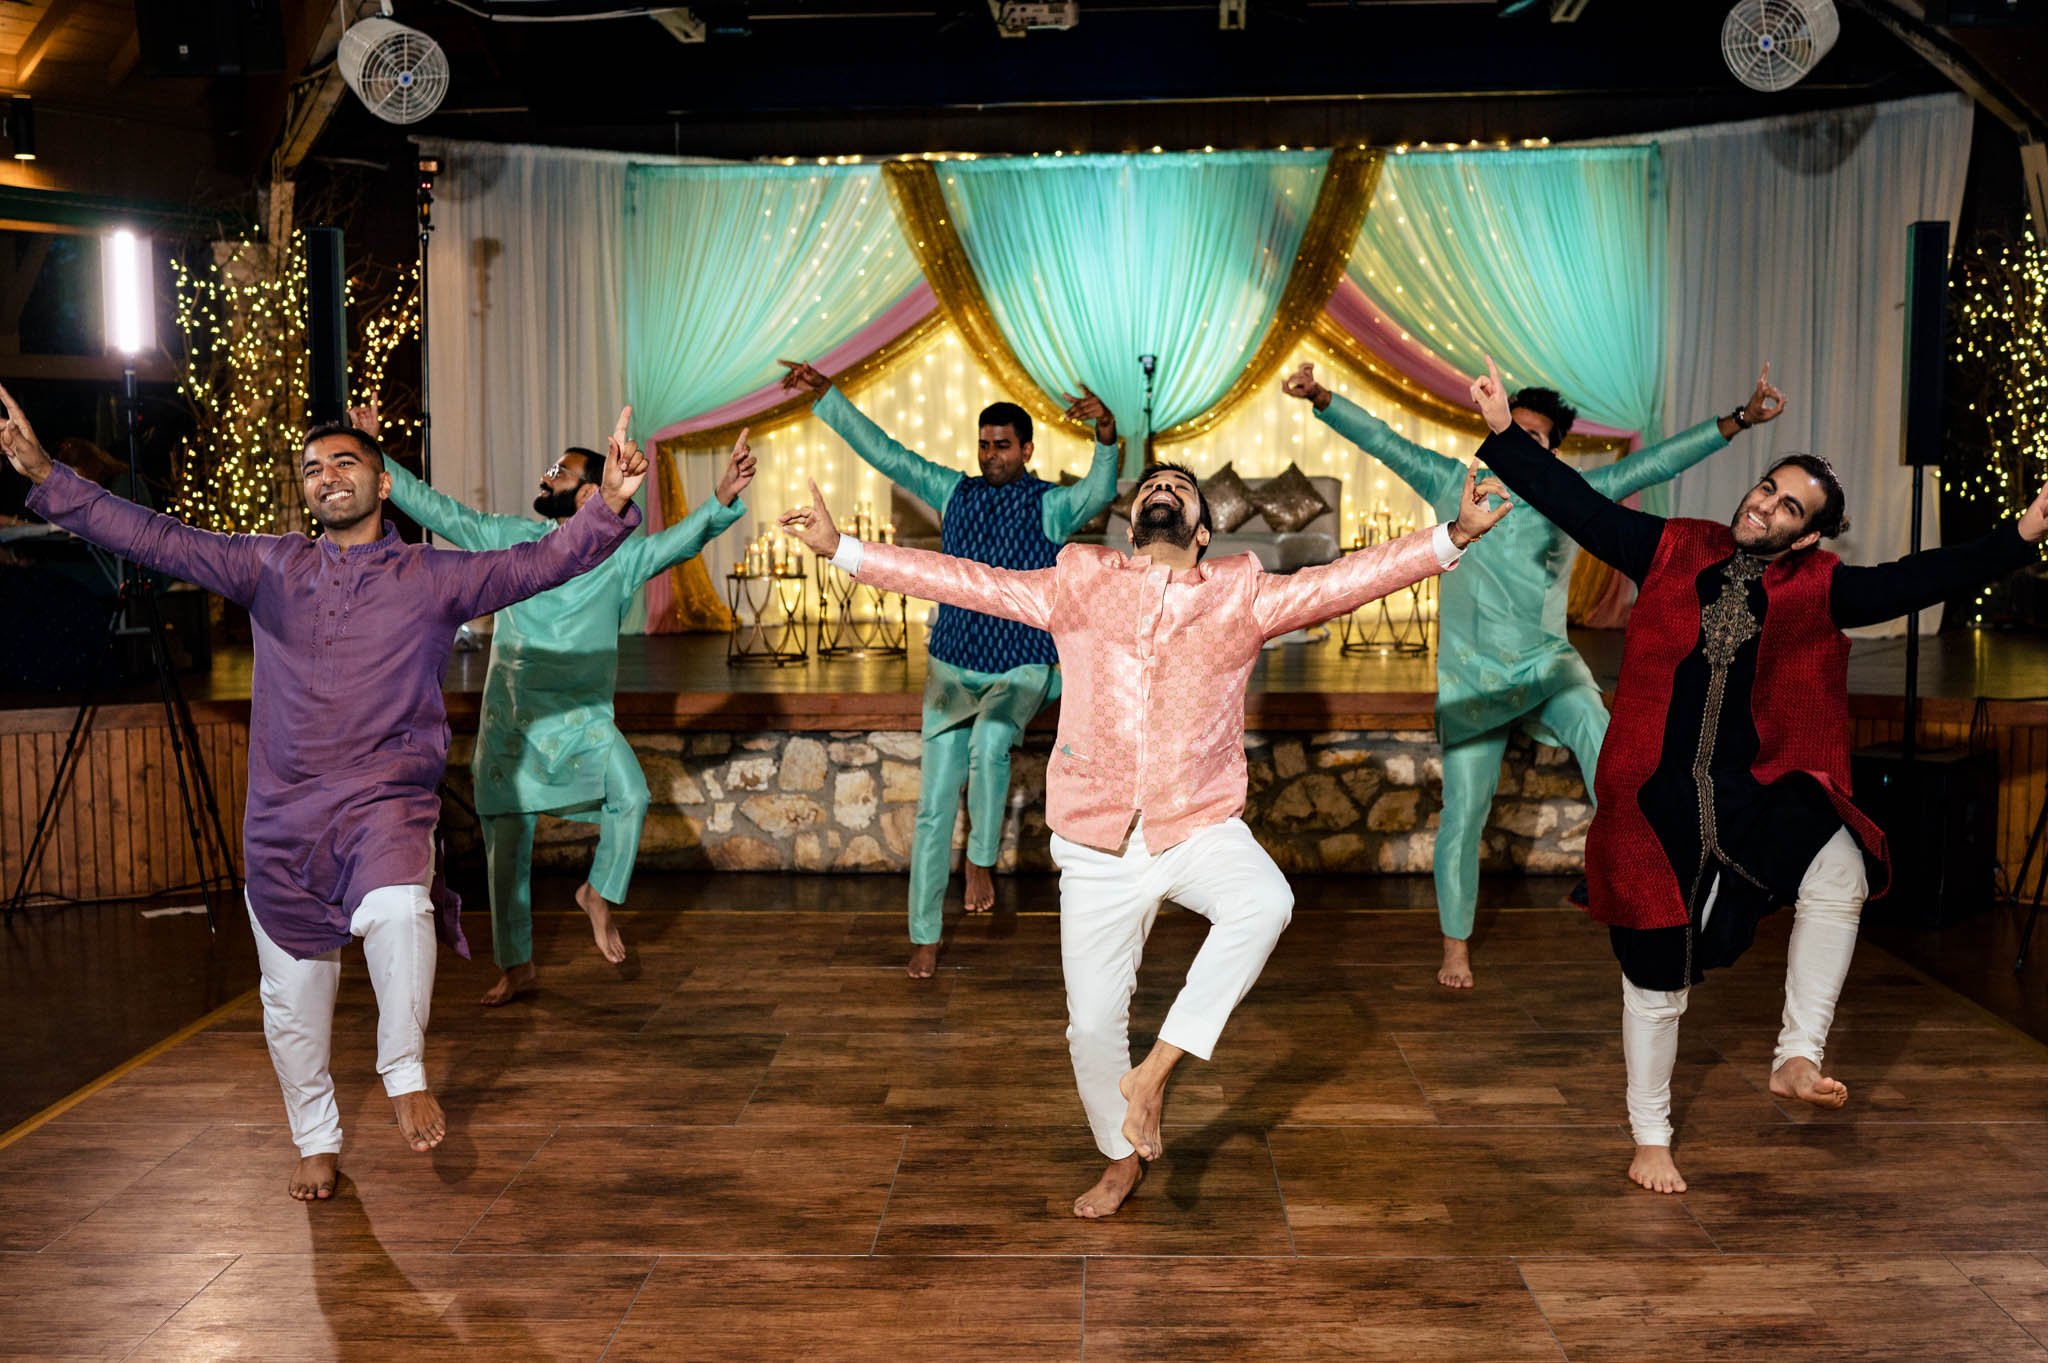 A group of Indian men dancing on a stage at a Biltmore Estate wedding.